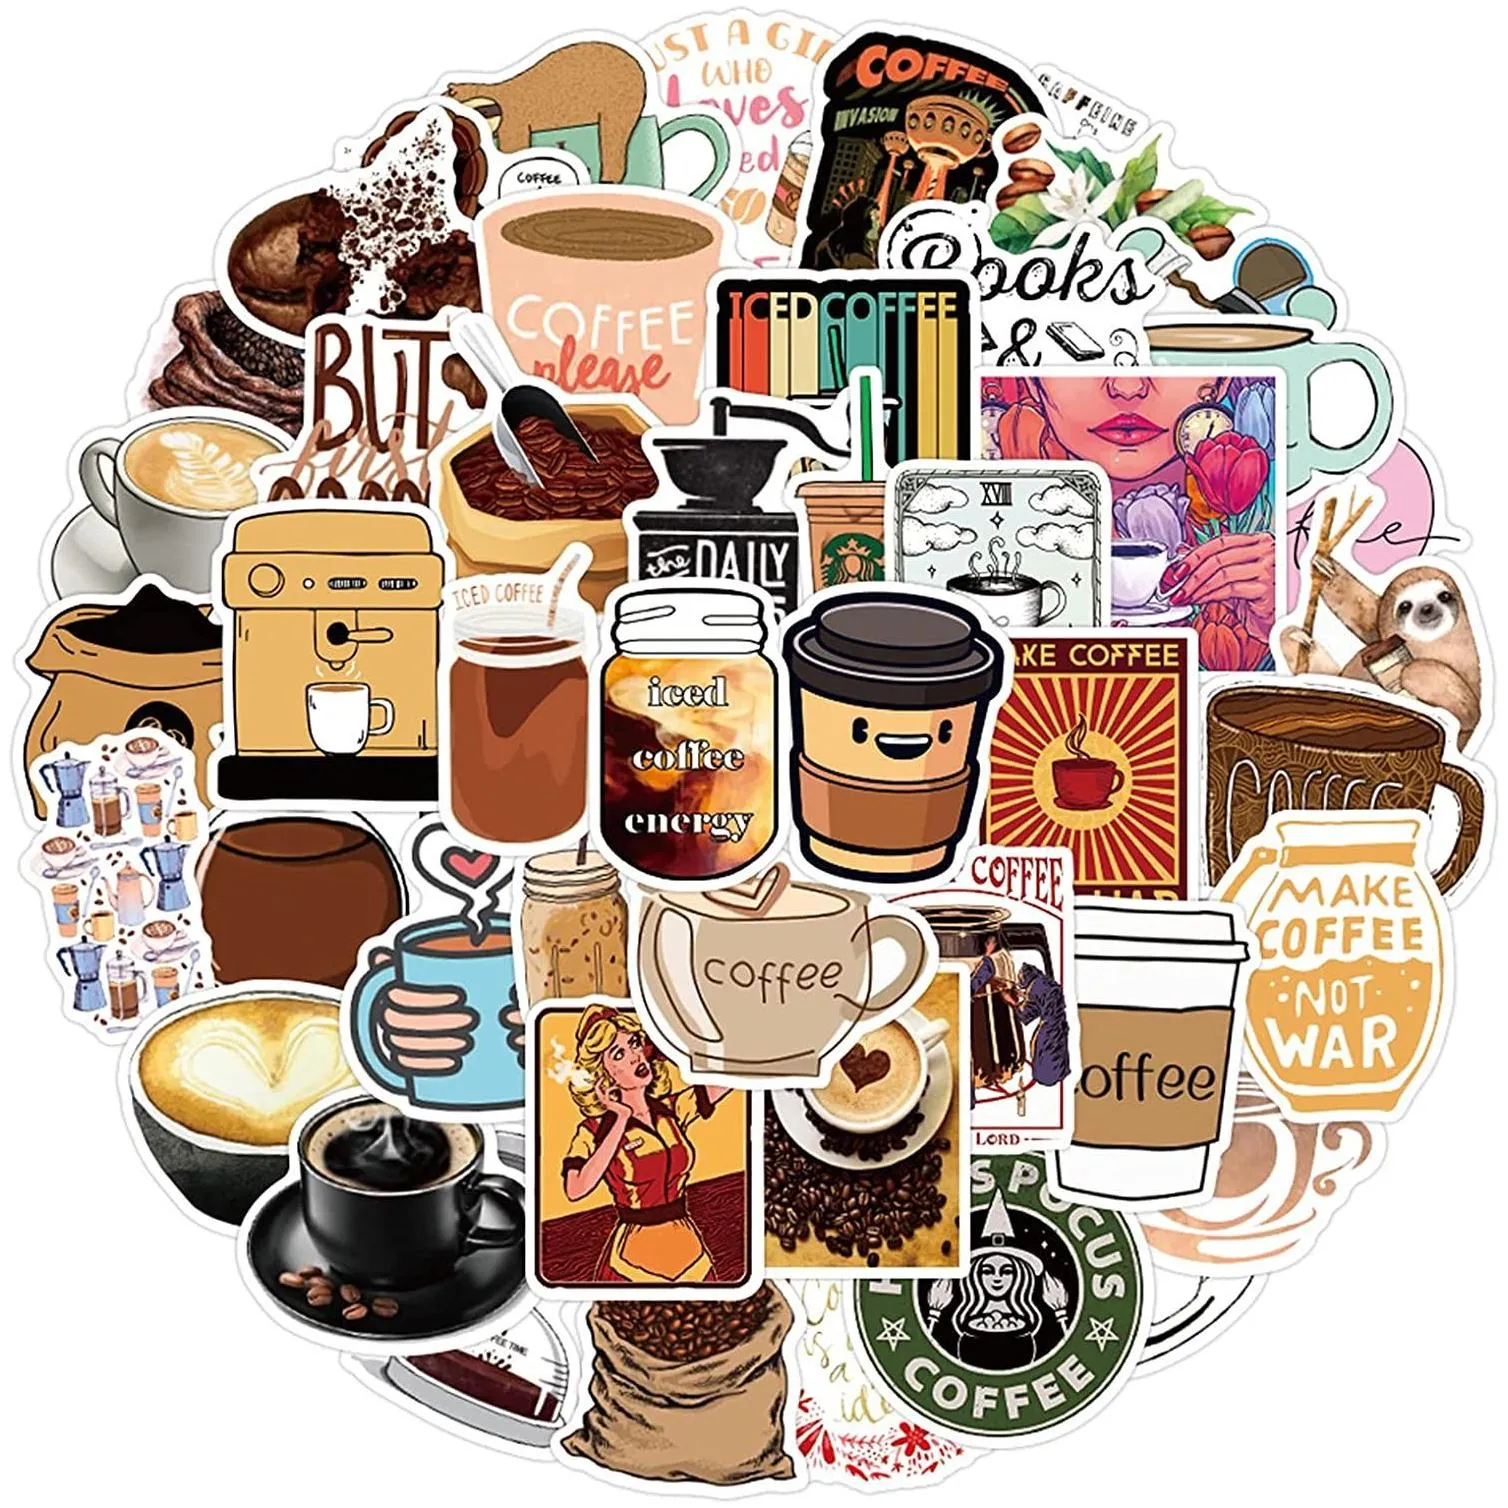 50pcs coffee stickers waterproof vinyl funny cartoon sticker skate accessories for skateboard laptop luggage bicycle motorcycle phone car decals party